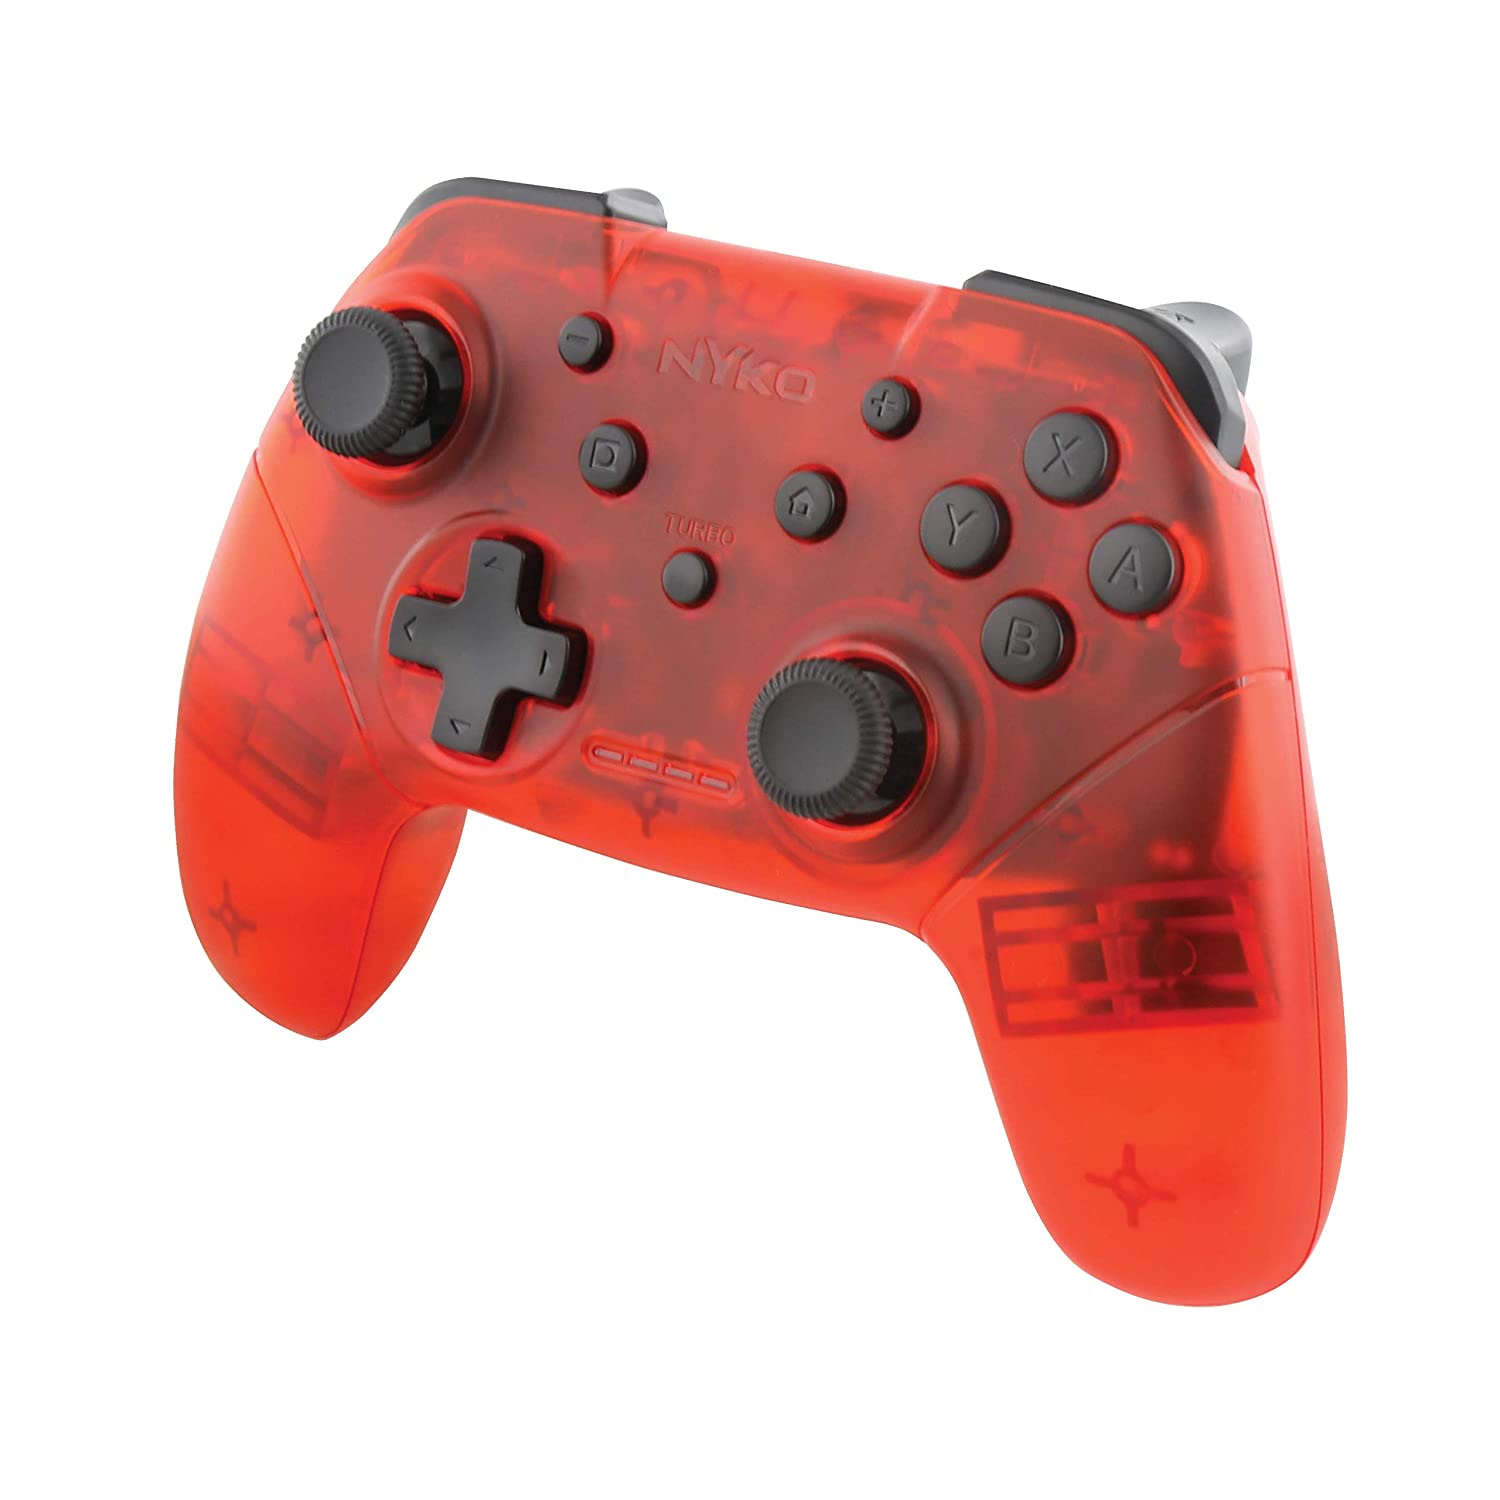 Nyko NSW Wireless Core Controller Translucent Red (87261)